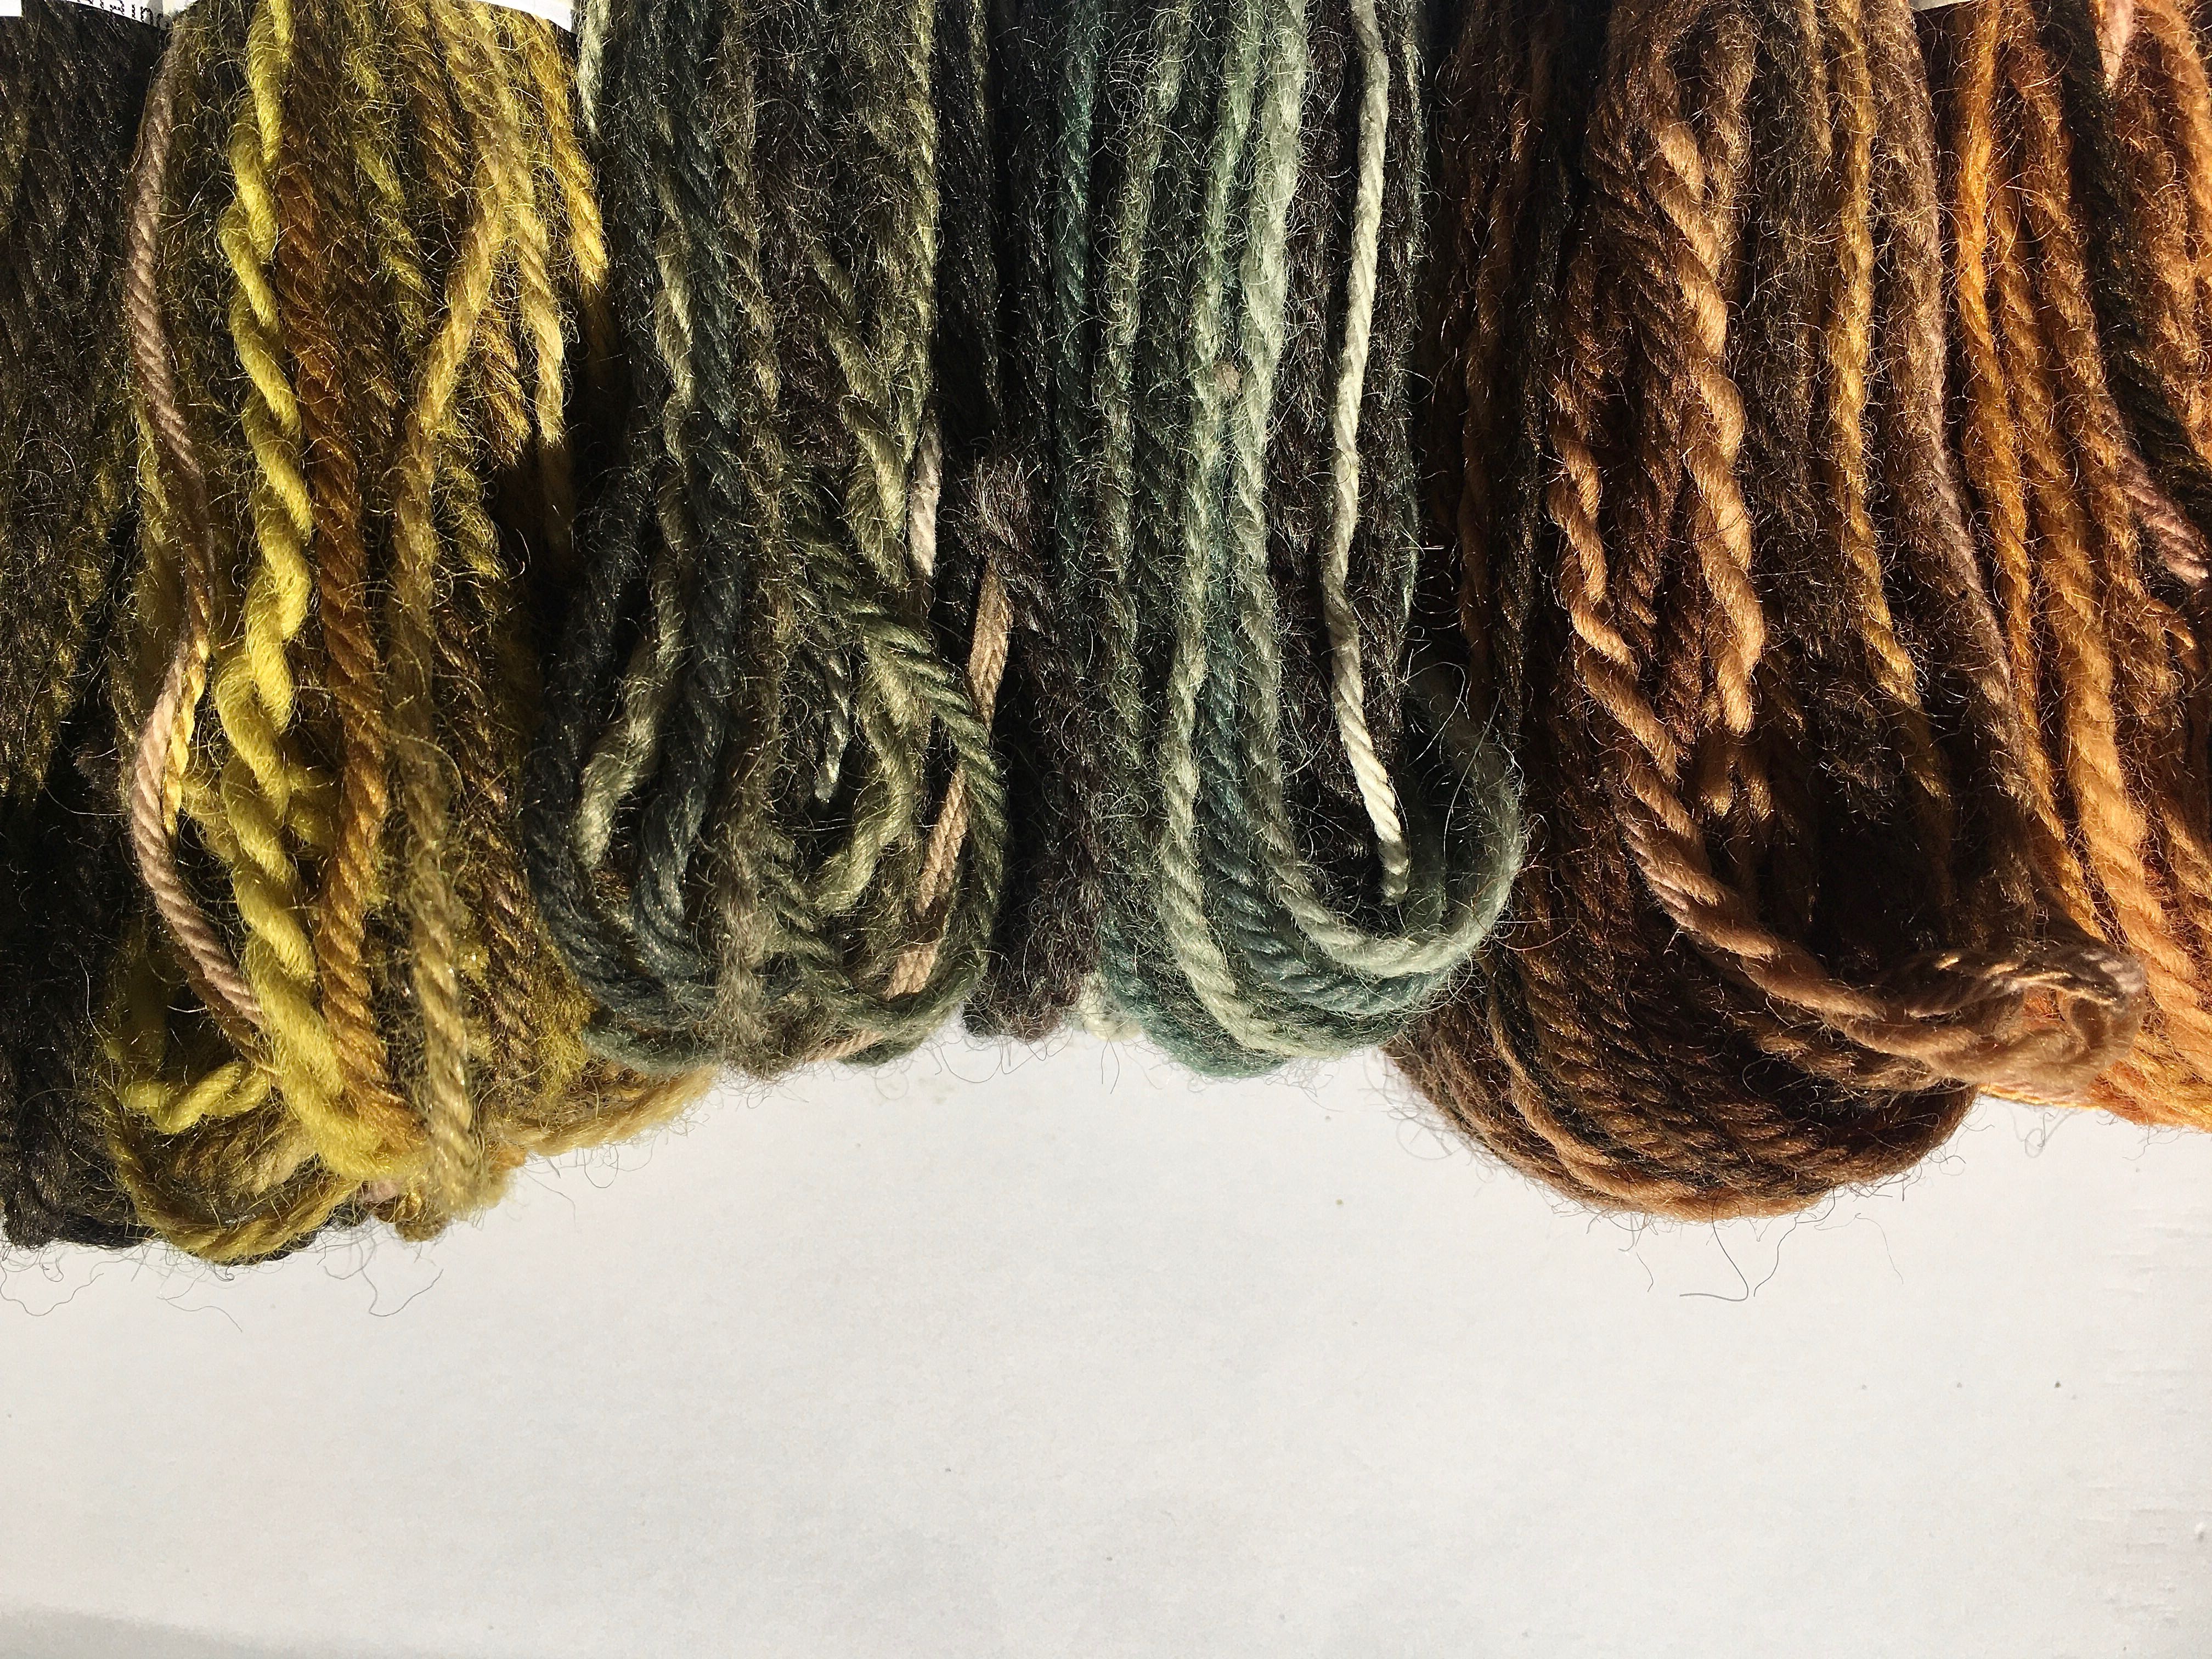 Samples of yarn dyed with natural dyes